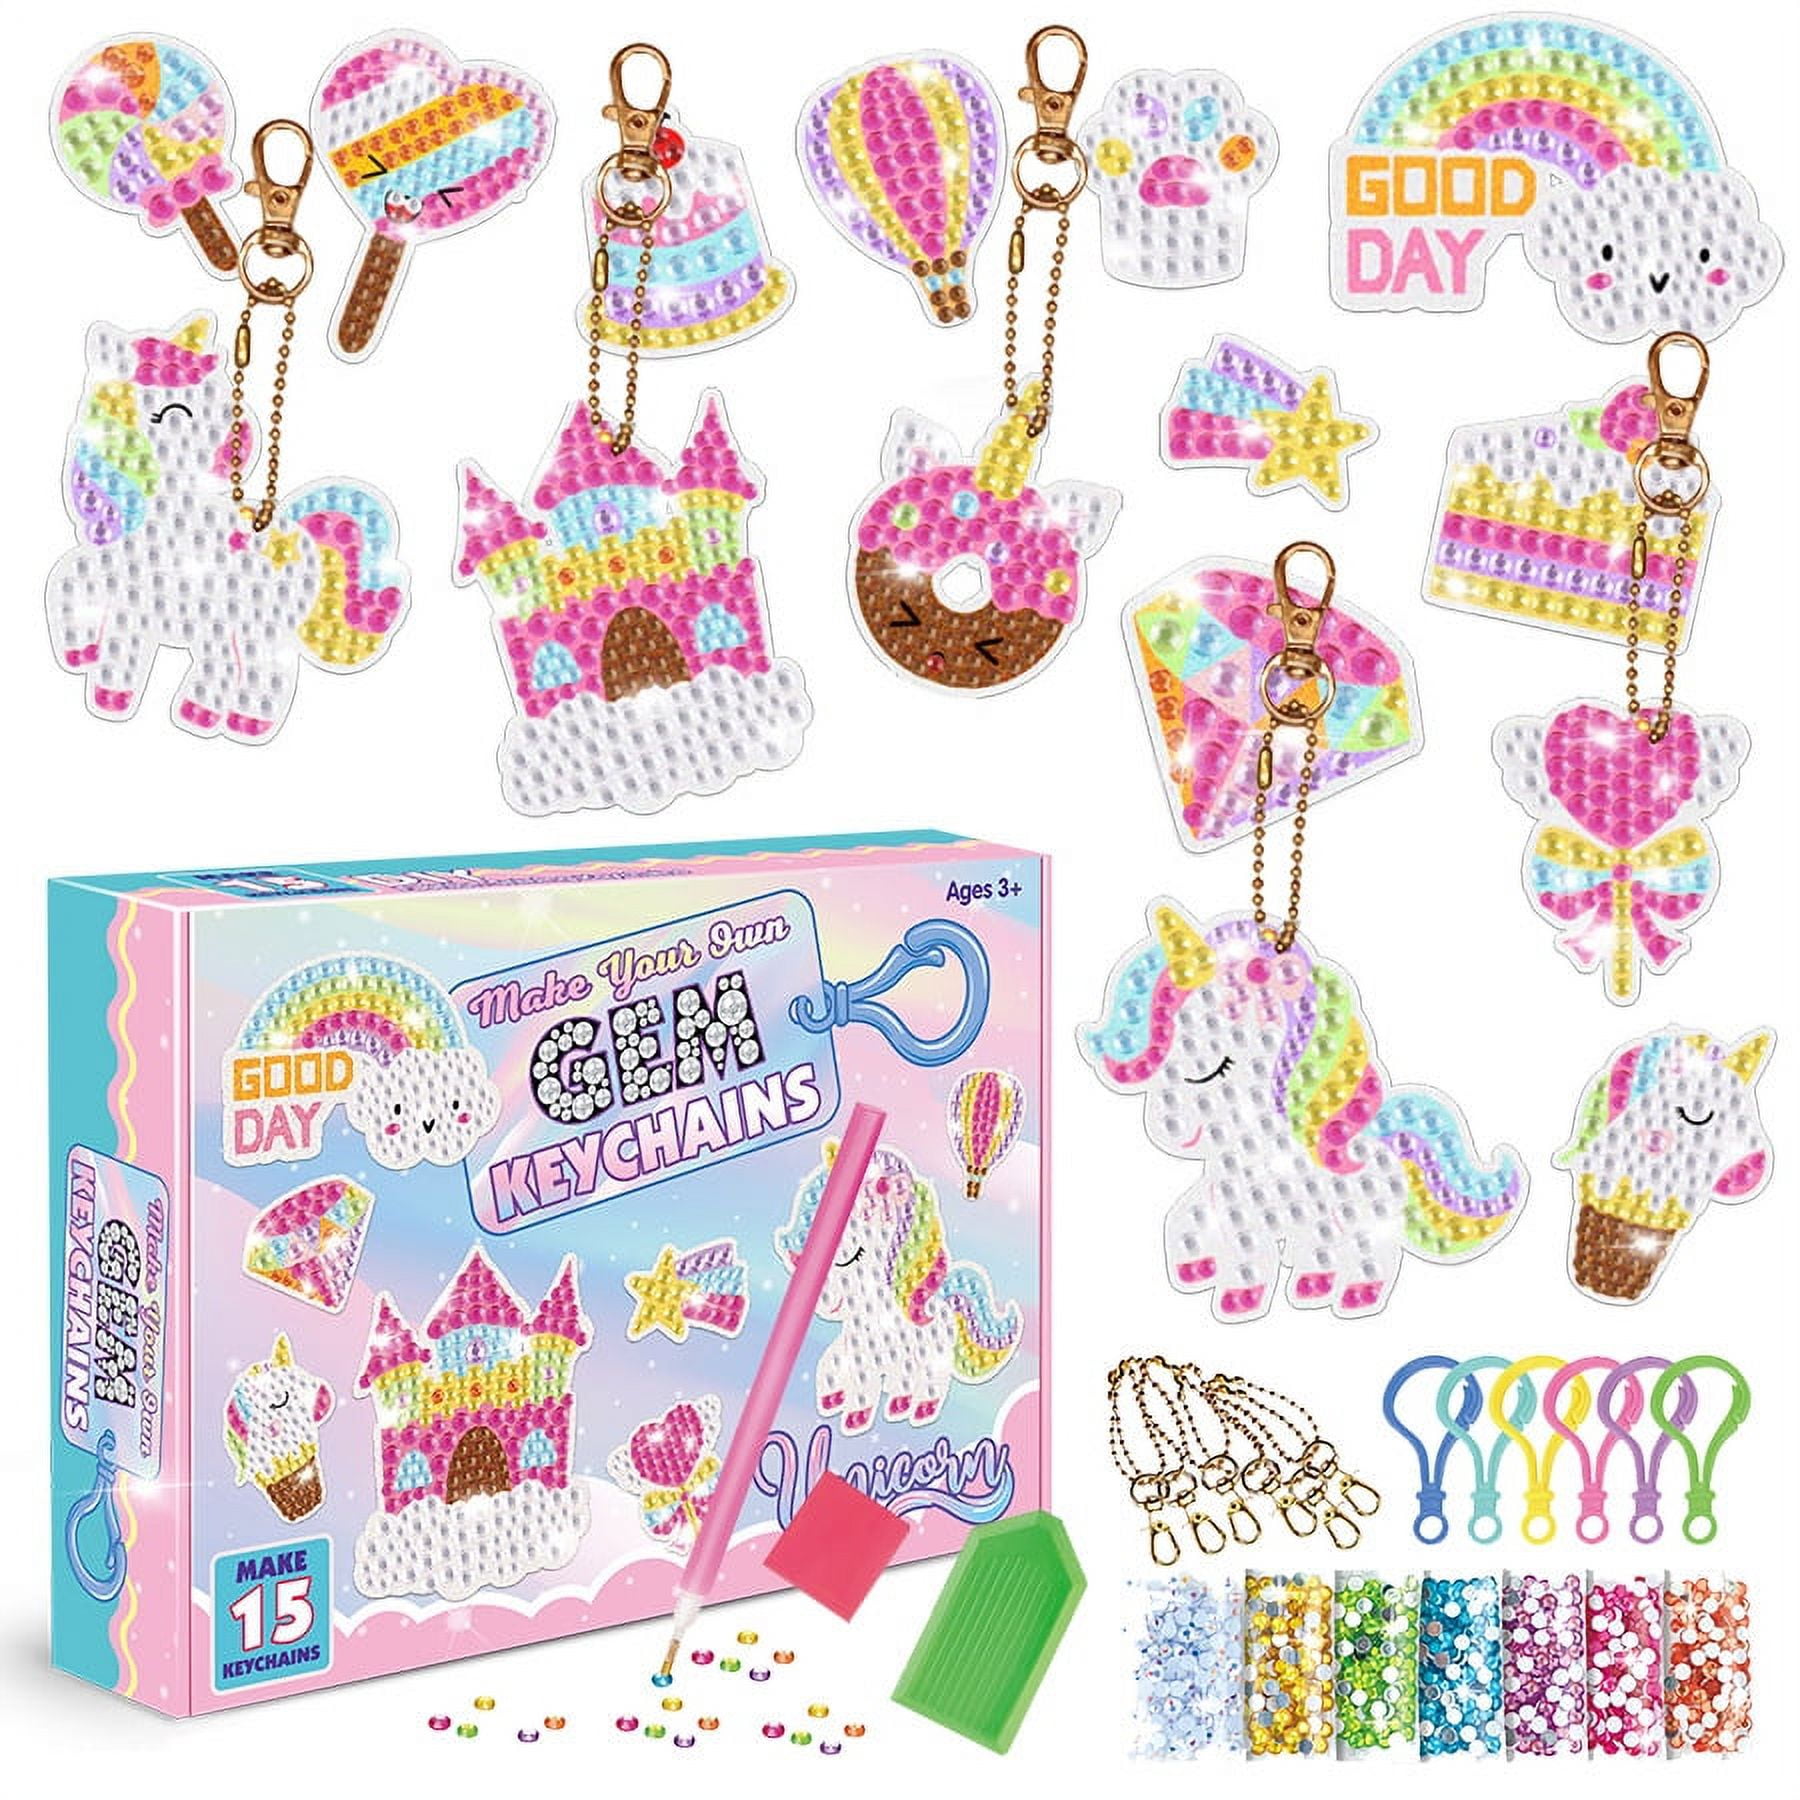 Arts and Crafts for Kids Ages 8-12 - Make Your Own GEM Keychains - 5D  Diamond Painting by Numbers Art Kits for Girls Kids Toddler Ages 3-5 4-6  6-8 Easter Basket Stuffers